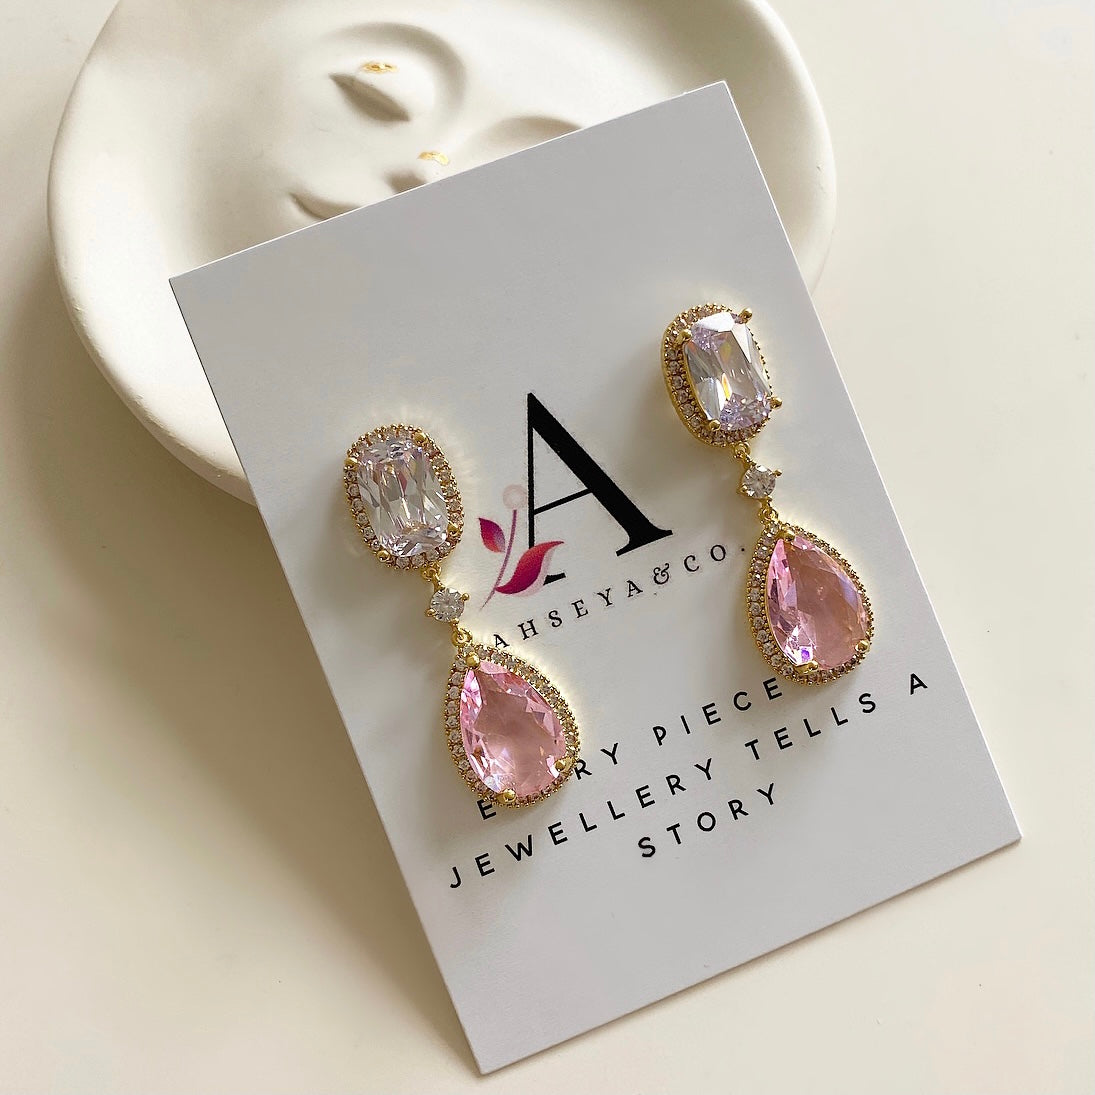 These sparkling Pink Crystal  Earrings, crafted with cz crystals, will add a touch of elegance and sparkle to any ensemble. The exquisite drop earring design and dazzling cubic zirconia crystals will make you shine. Elevate your style and make a stunning statement with these beautiful earrings. Available in a silver & gold finish. Earring drop 4.2cm